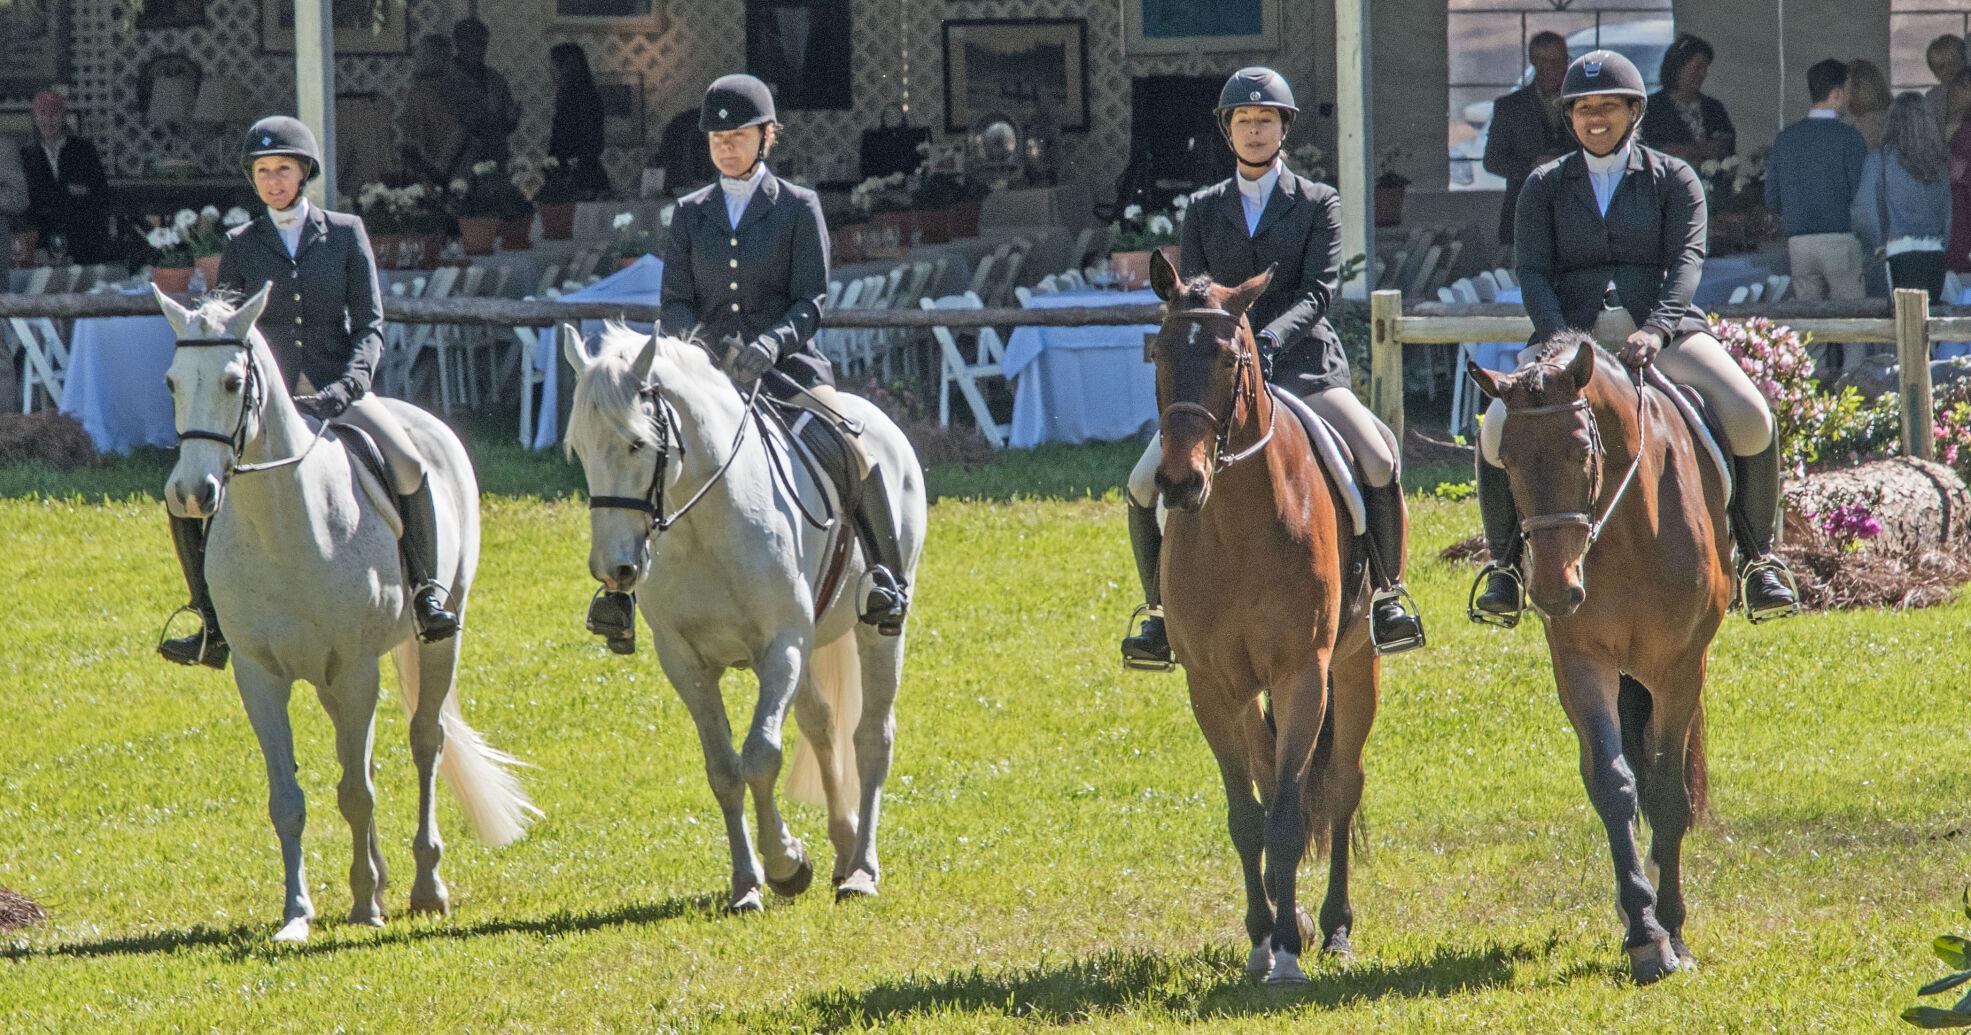 Aiken Horse Show offers unique setting, fun to watch classes and souvenirs